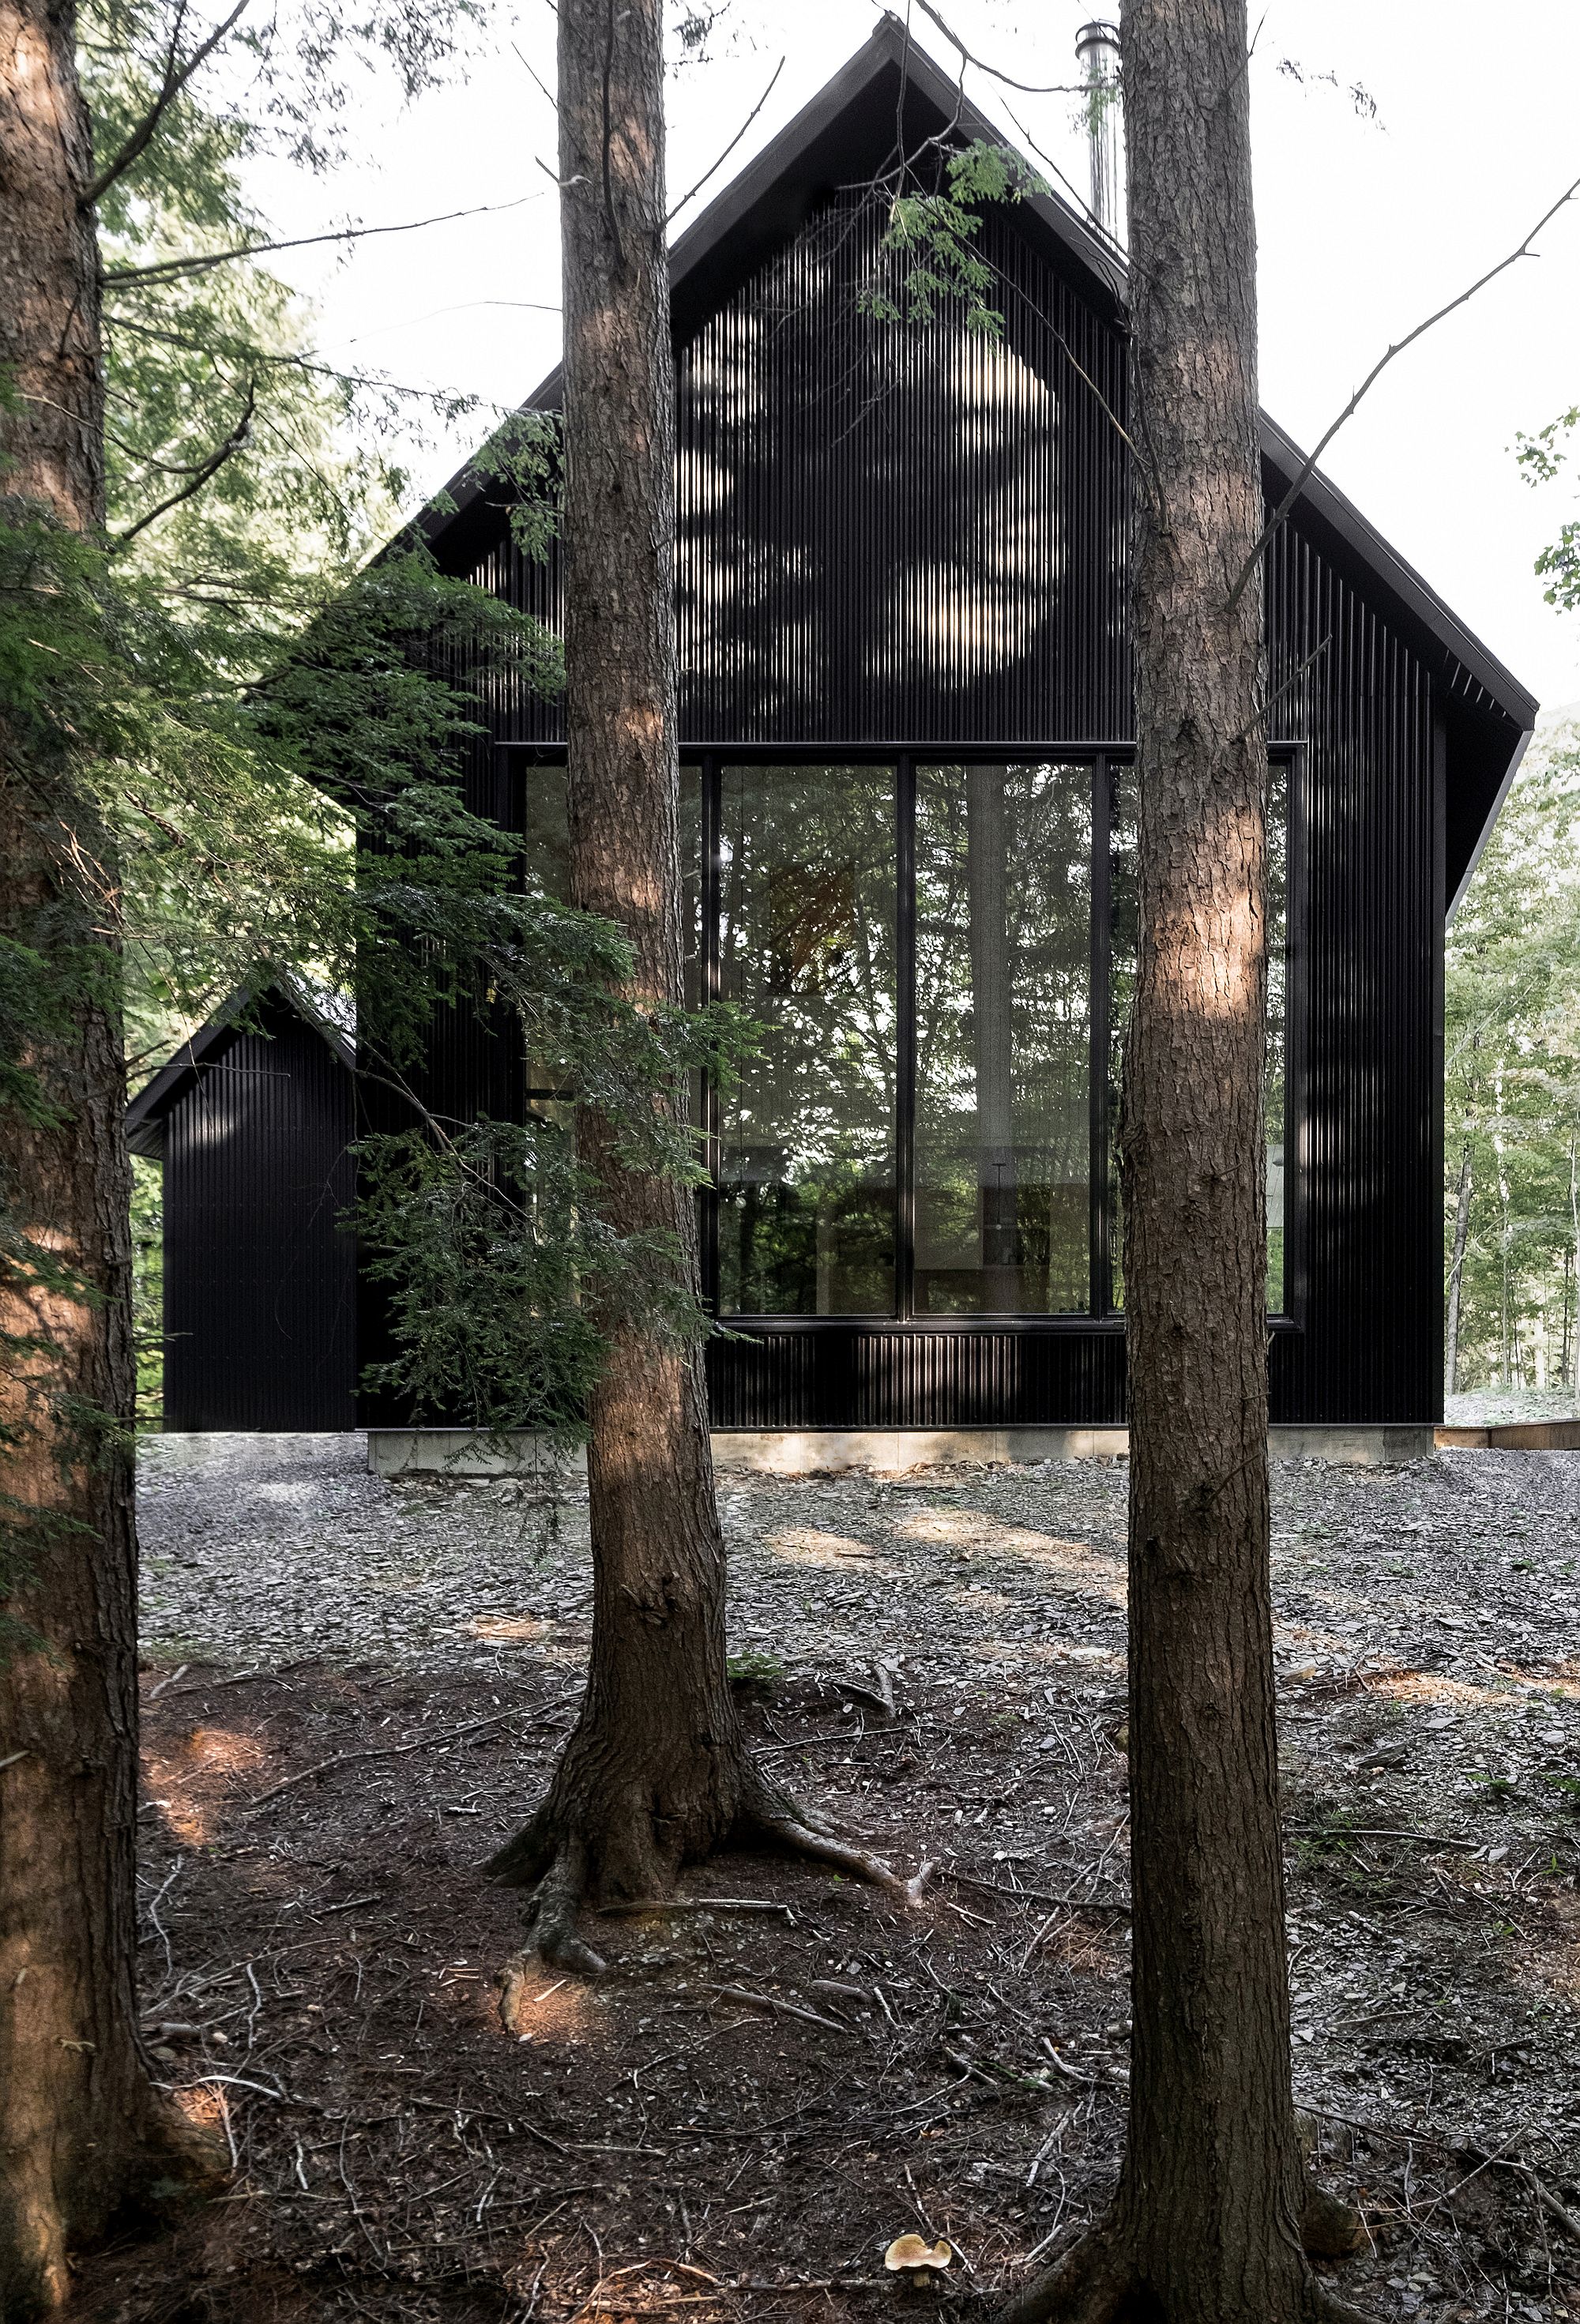 Dark exterior of the cabin allows it to blend in with the backdrop after sunset